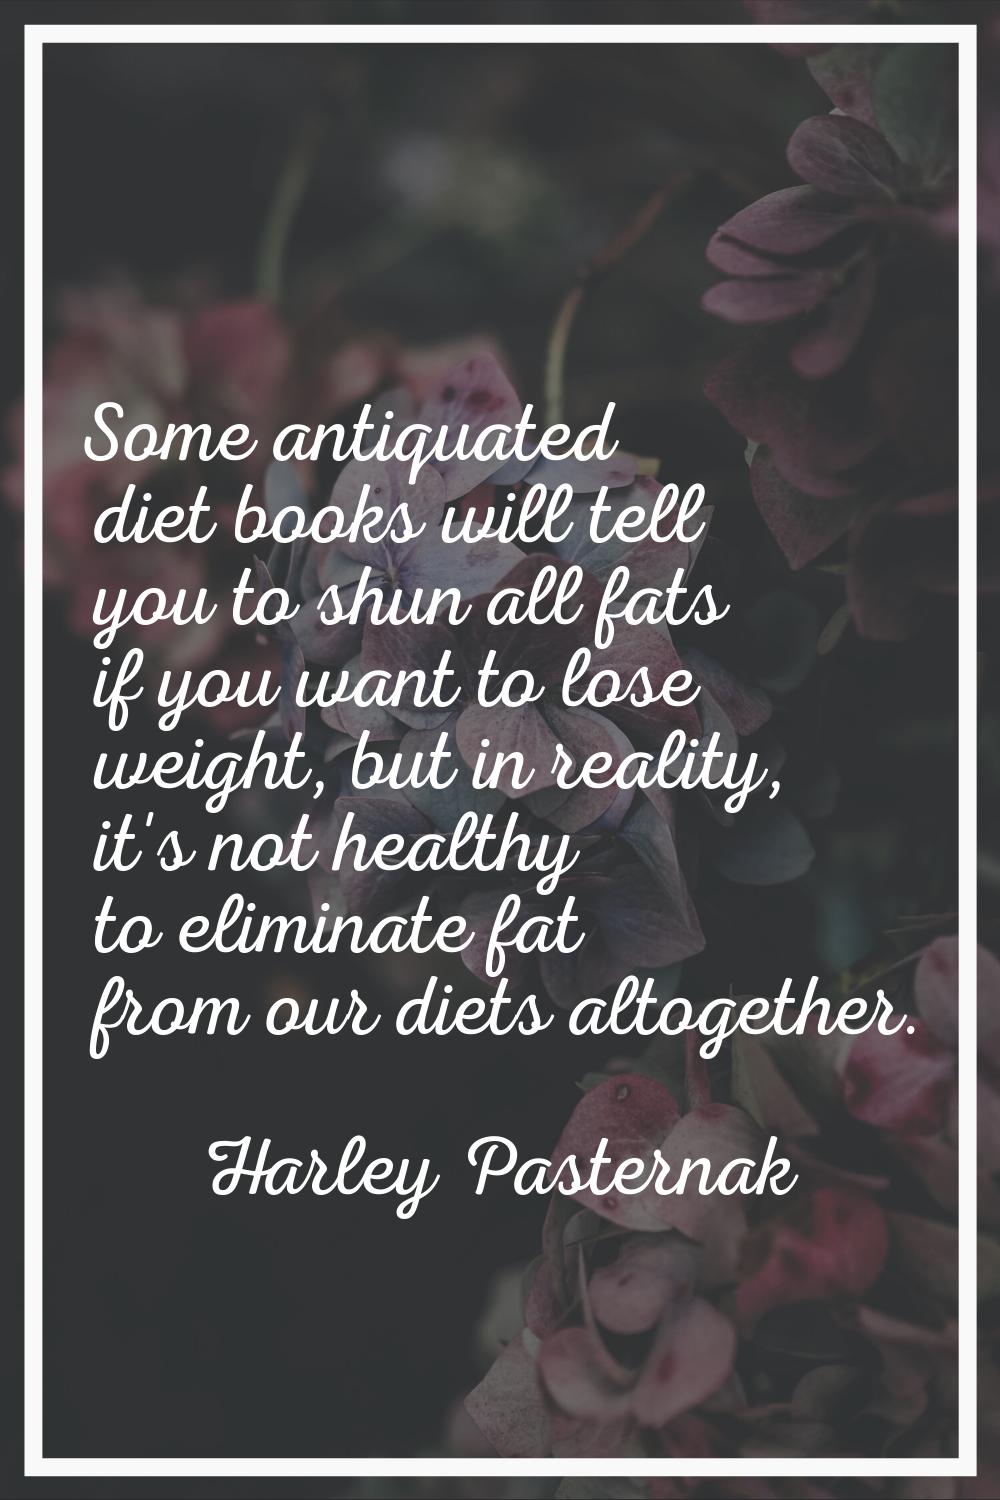 Some antiquated diet books will tell you to shun all fats if you want to lose weight, but in realit